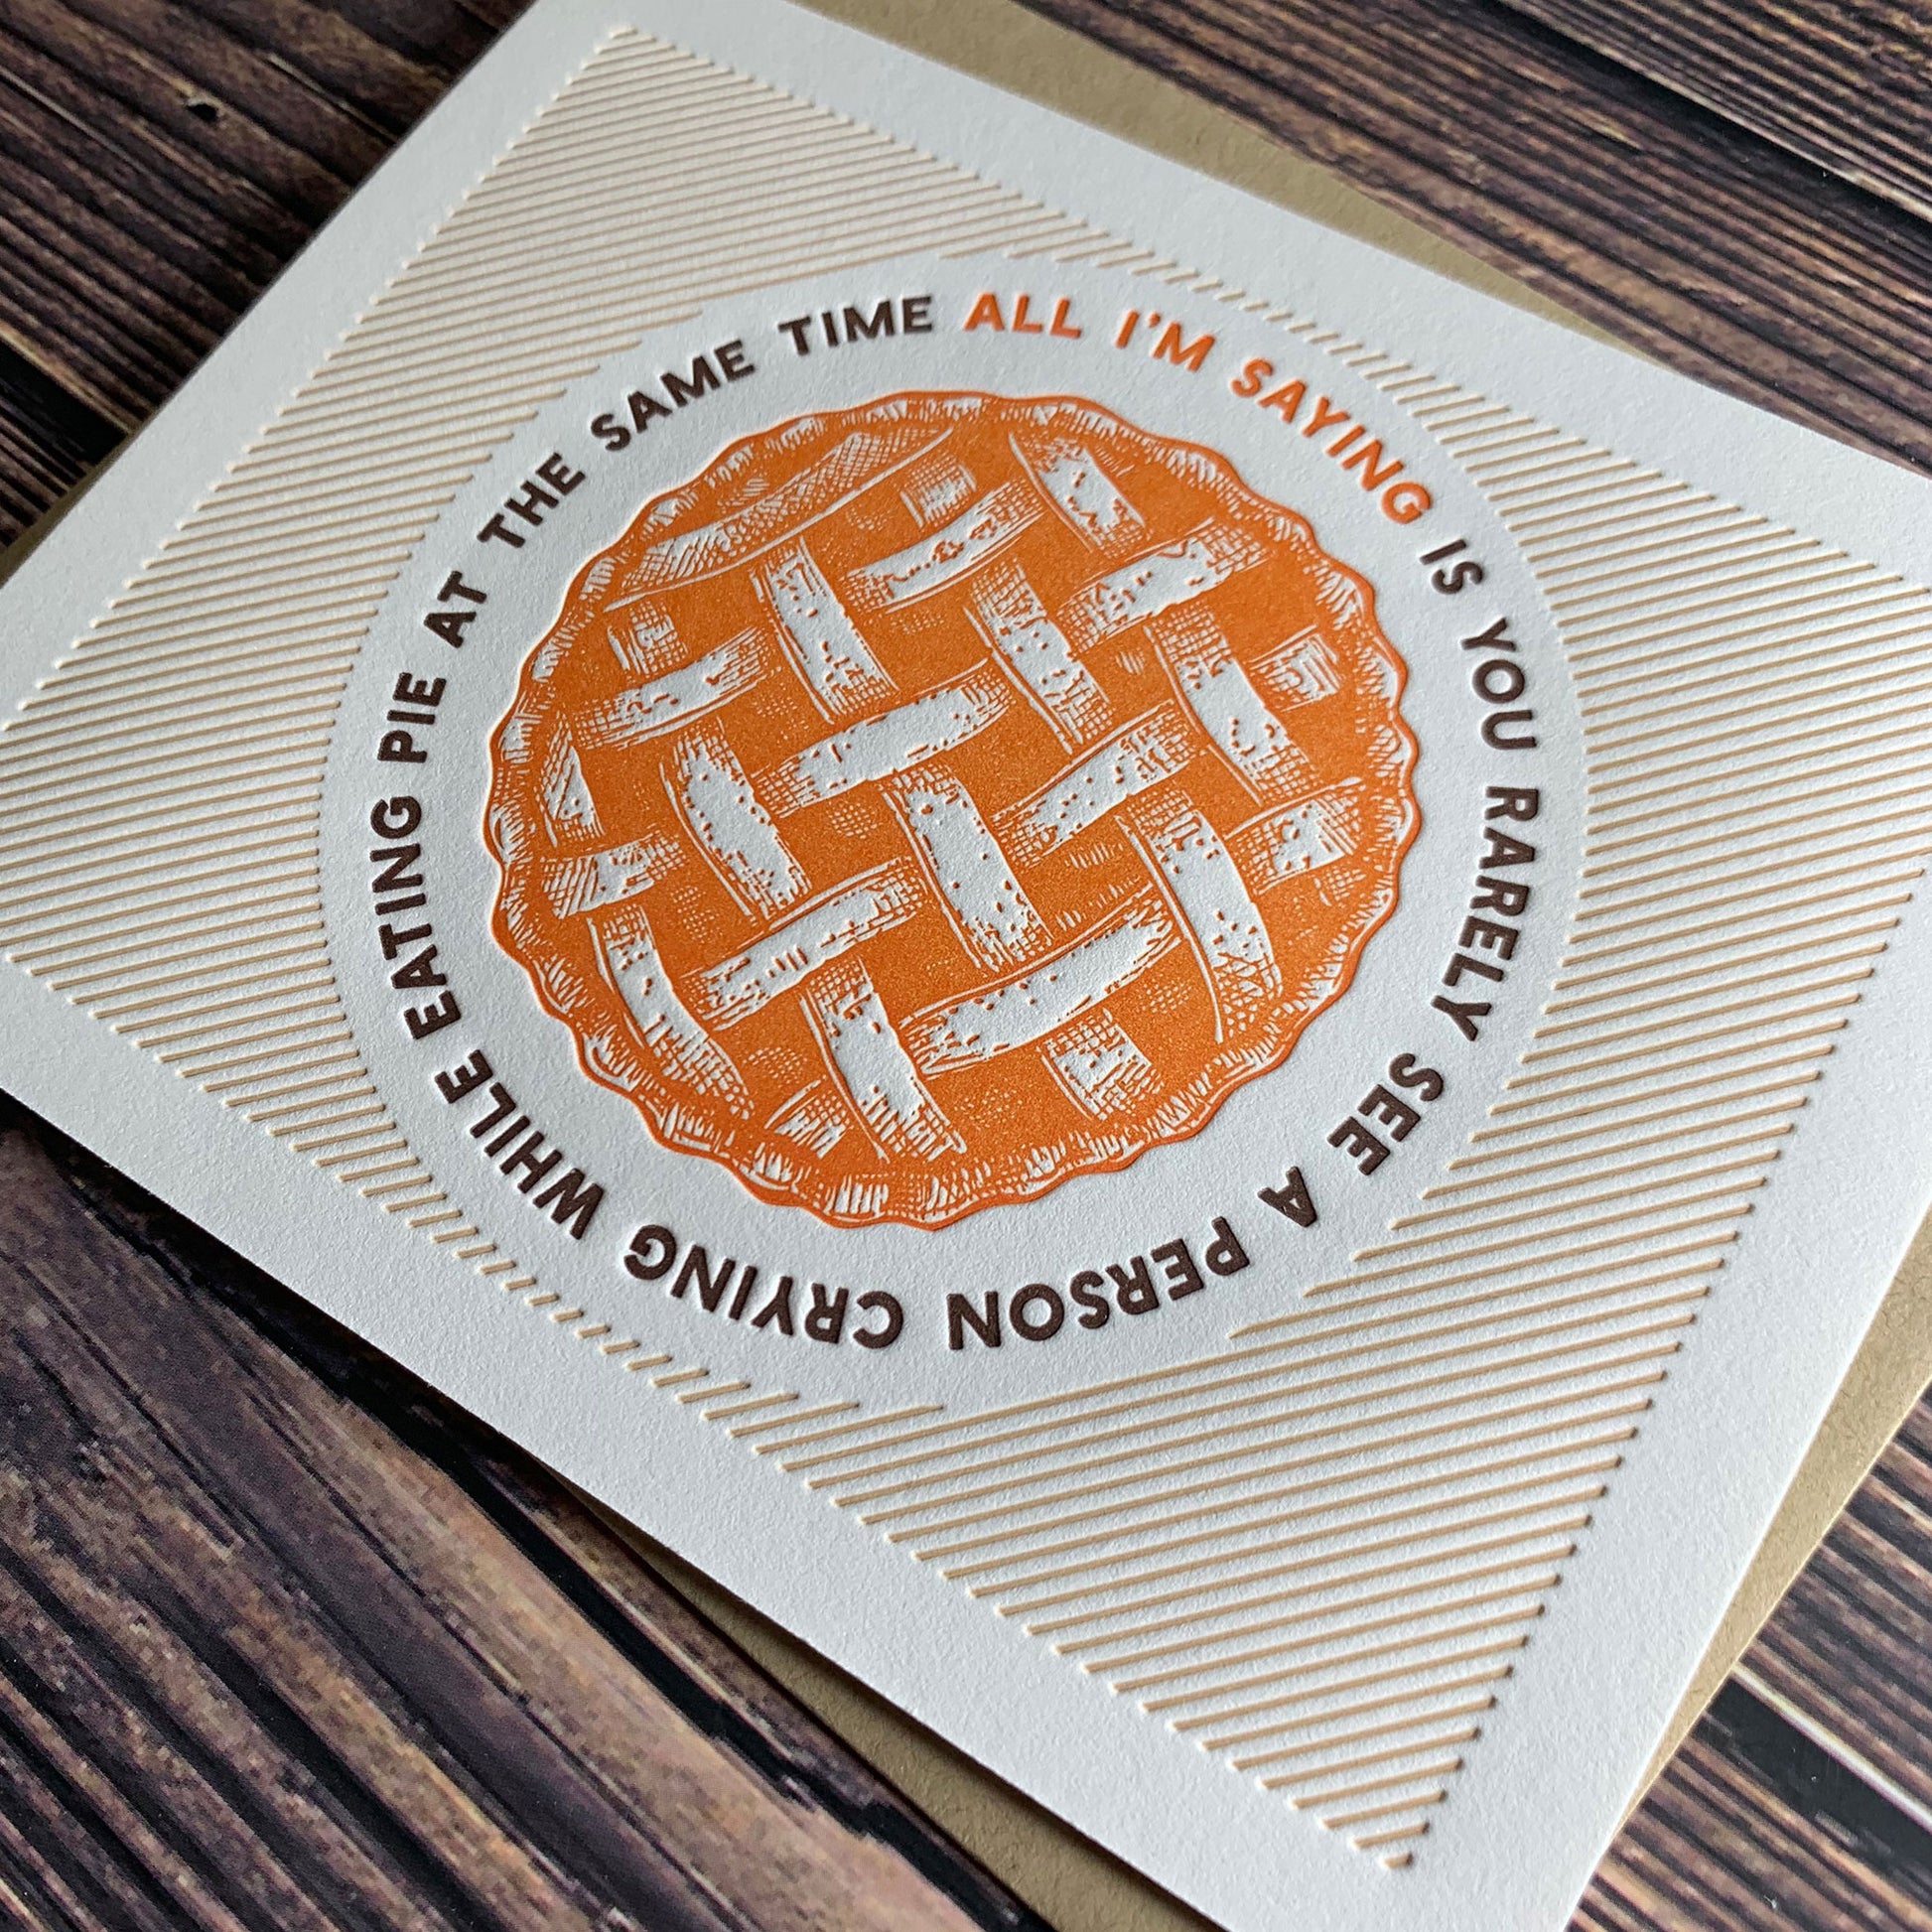 All I'm saying is you rarely see a person crying while eating pie at the same time, Funny Thanksgiving Card, Letterpress printed, view show letterpress impression,  includes envelope